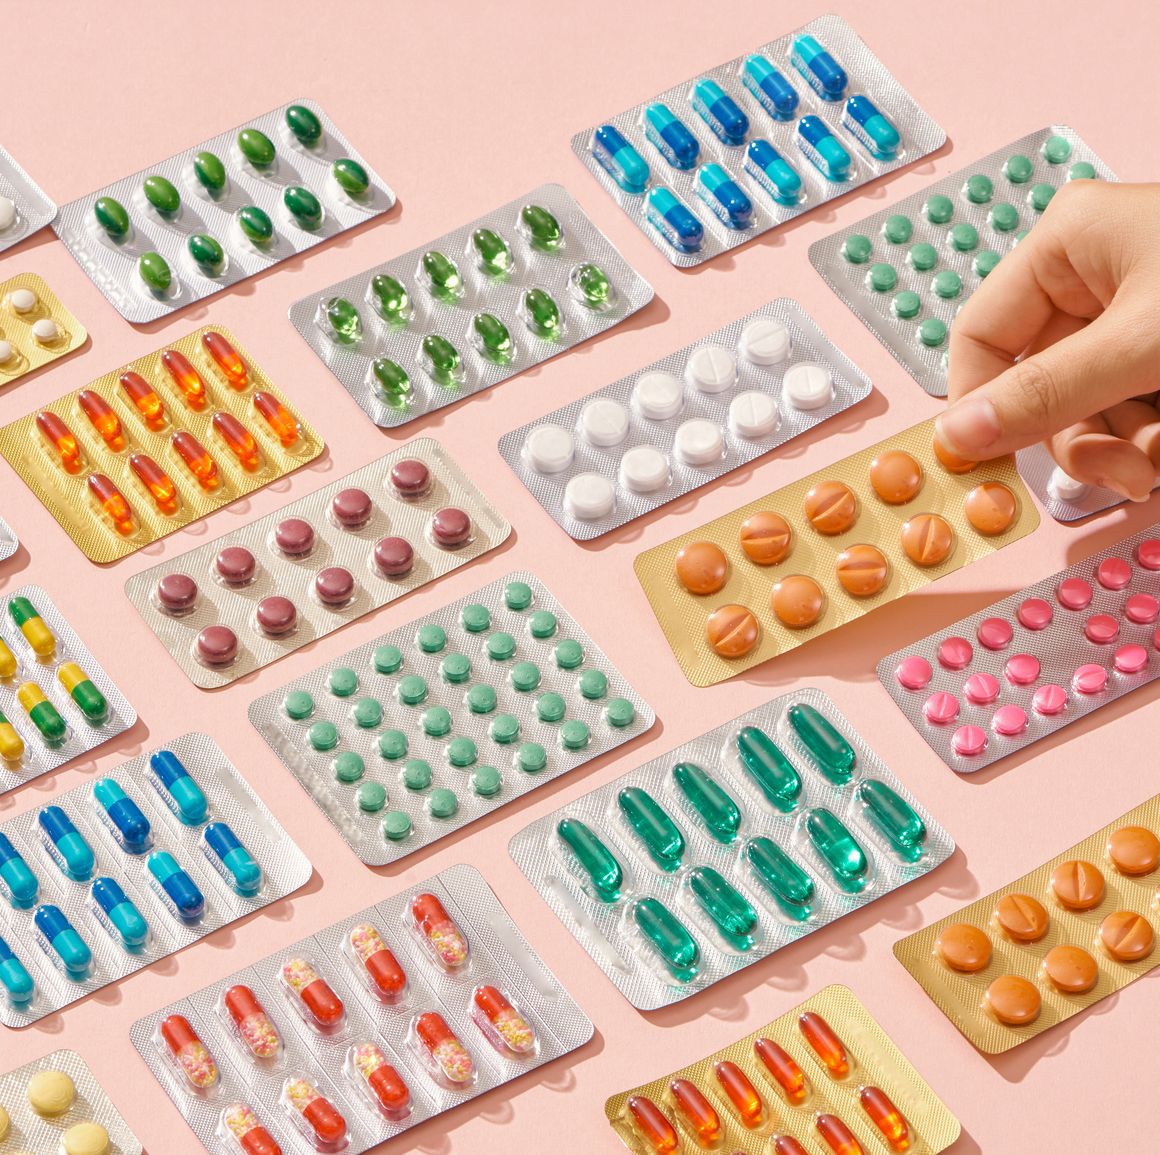 With the end of Roe v. Wade, local pharmacies could play a critical role in removing barriers to access birth control.